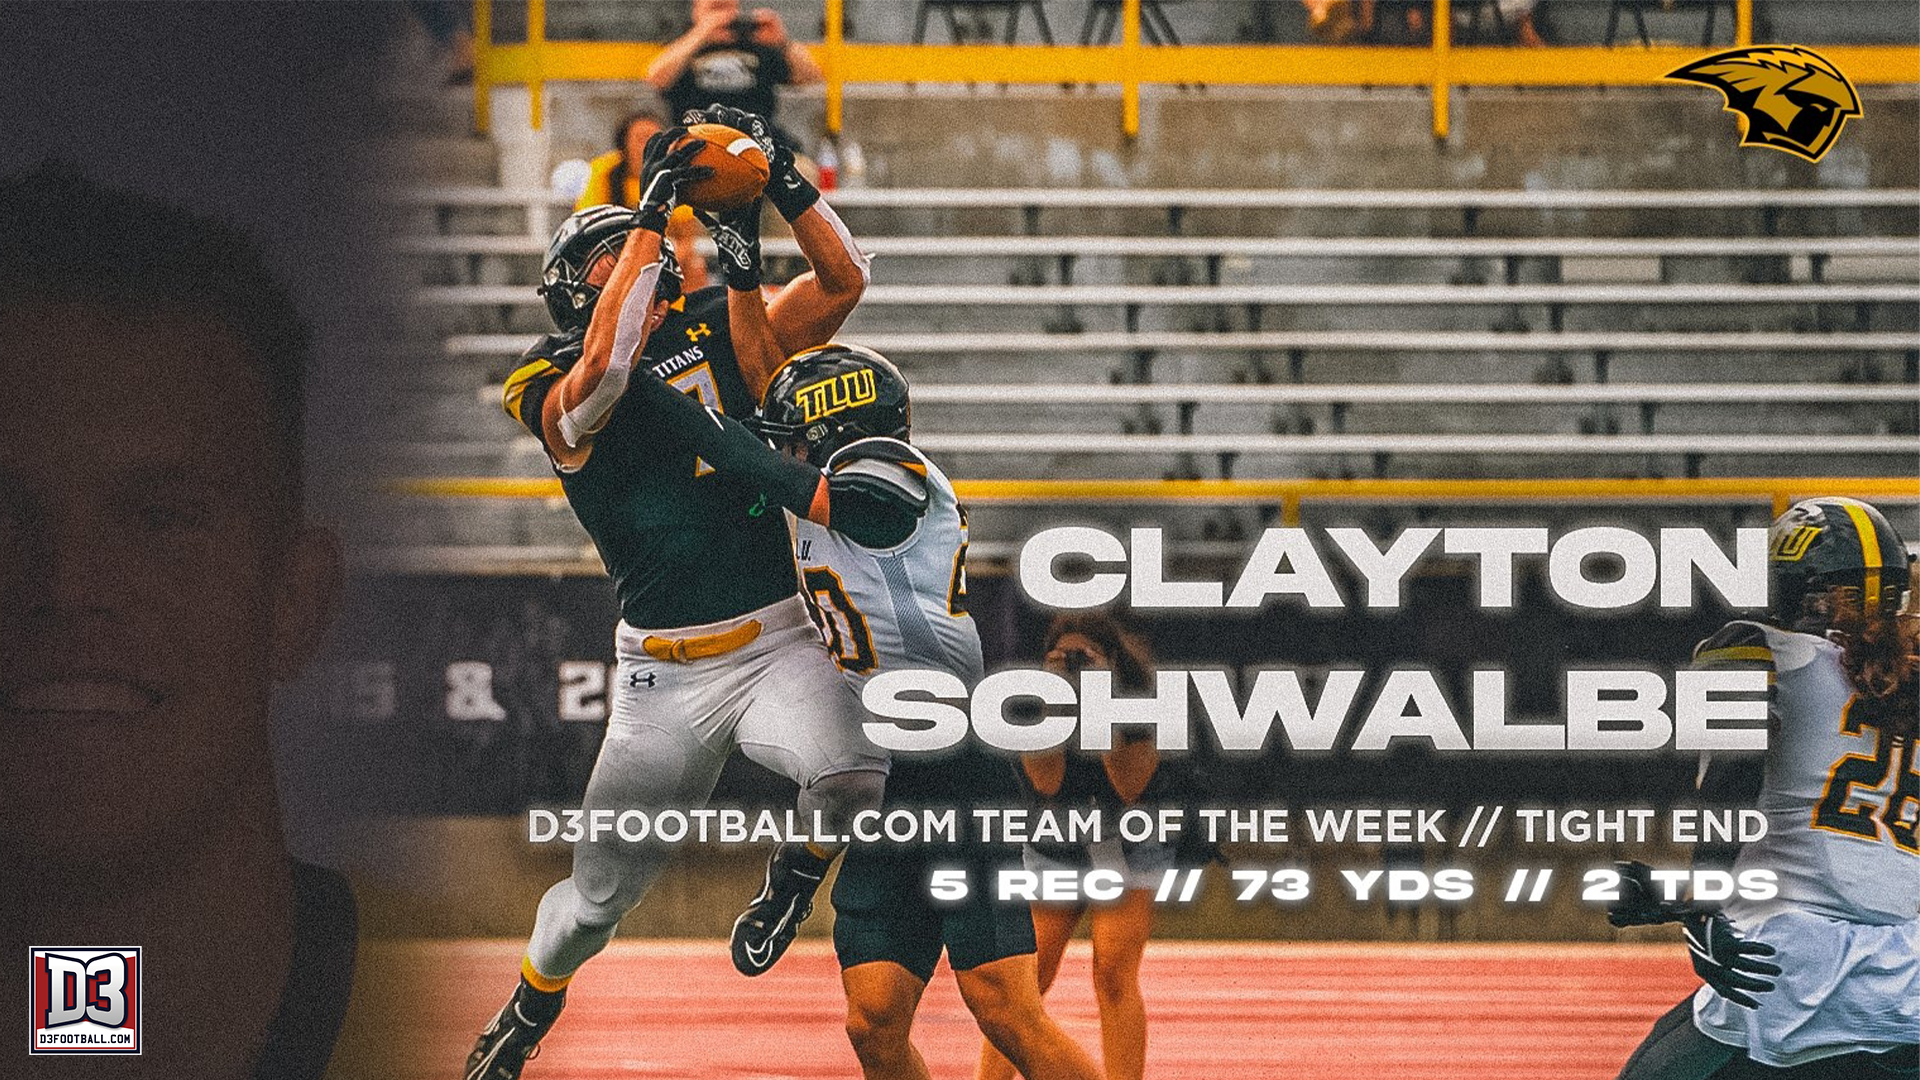 Schwalbe Named to D3football.com Team of the Week